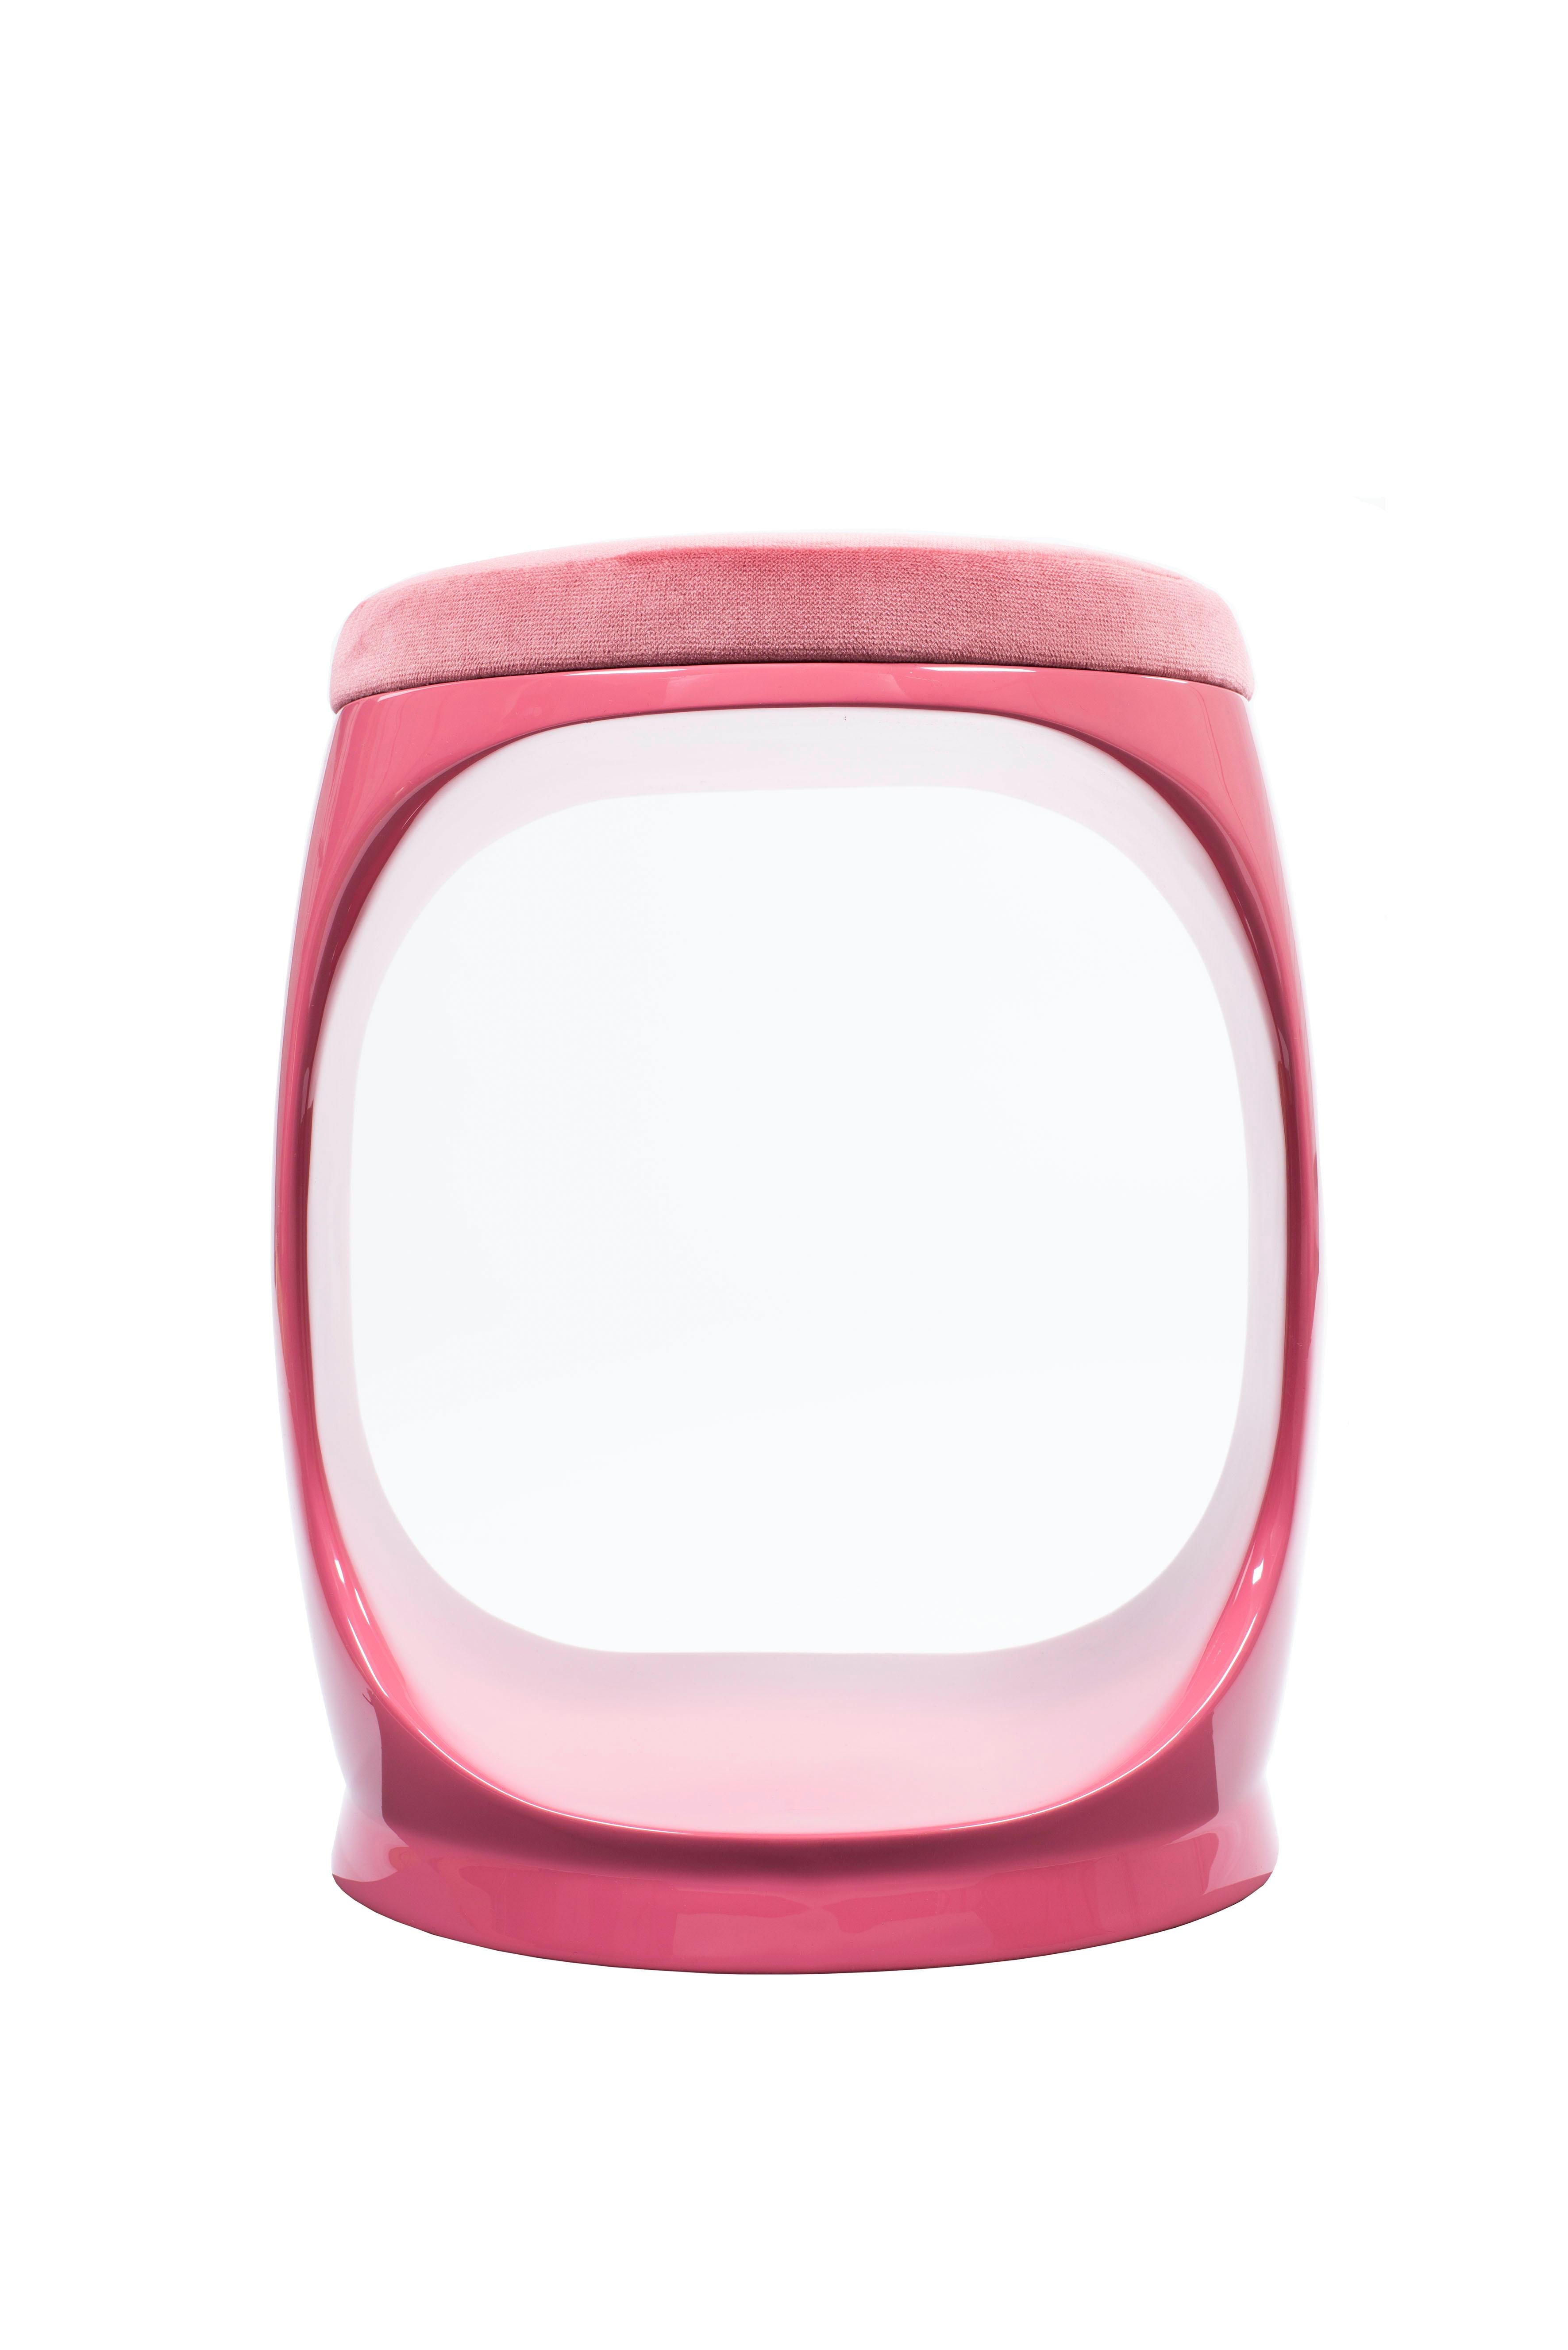 Contemporary Pouf by Cyril Rumpler Signet Ring, Hocker, Stool, pink.
These stools are available in a dozen colors and in a glossy finish. The black, white, navy blue, pink, red, turquoise, lilac, brown, green, and grey stools are available with a